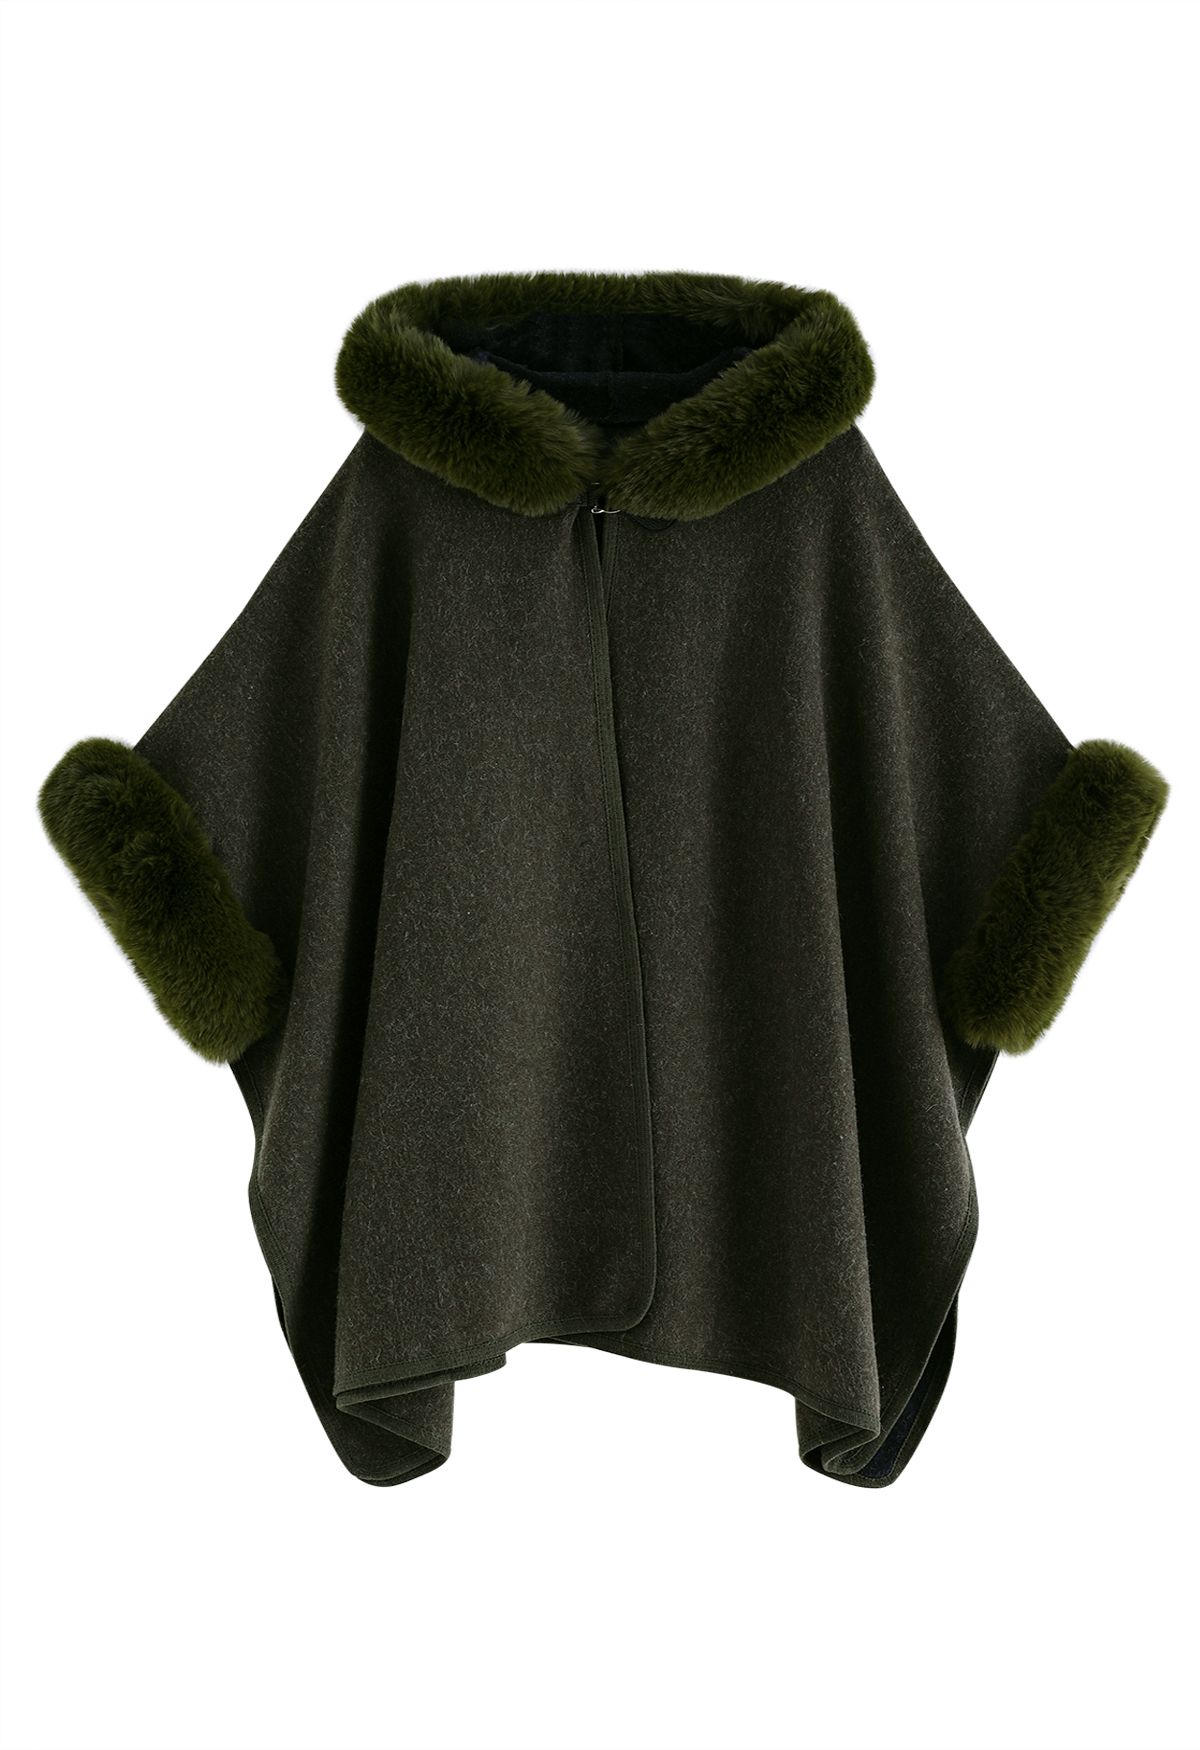 Cozy Faux Fur Hooded Poncho in Dark Green - Retro, Indie and Unique Fashion